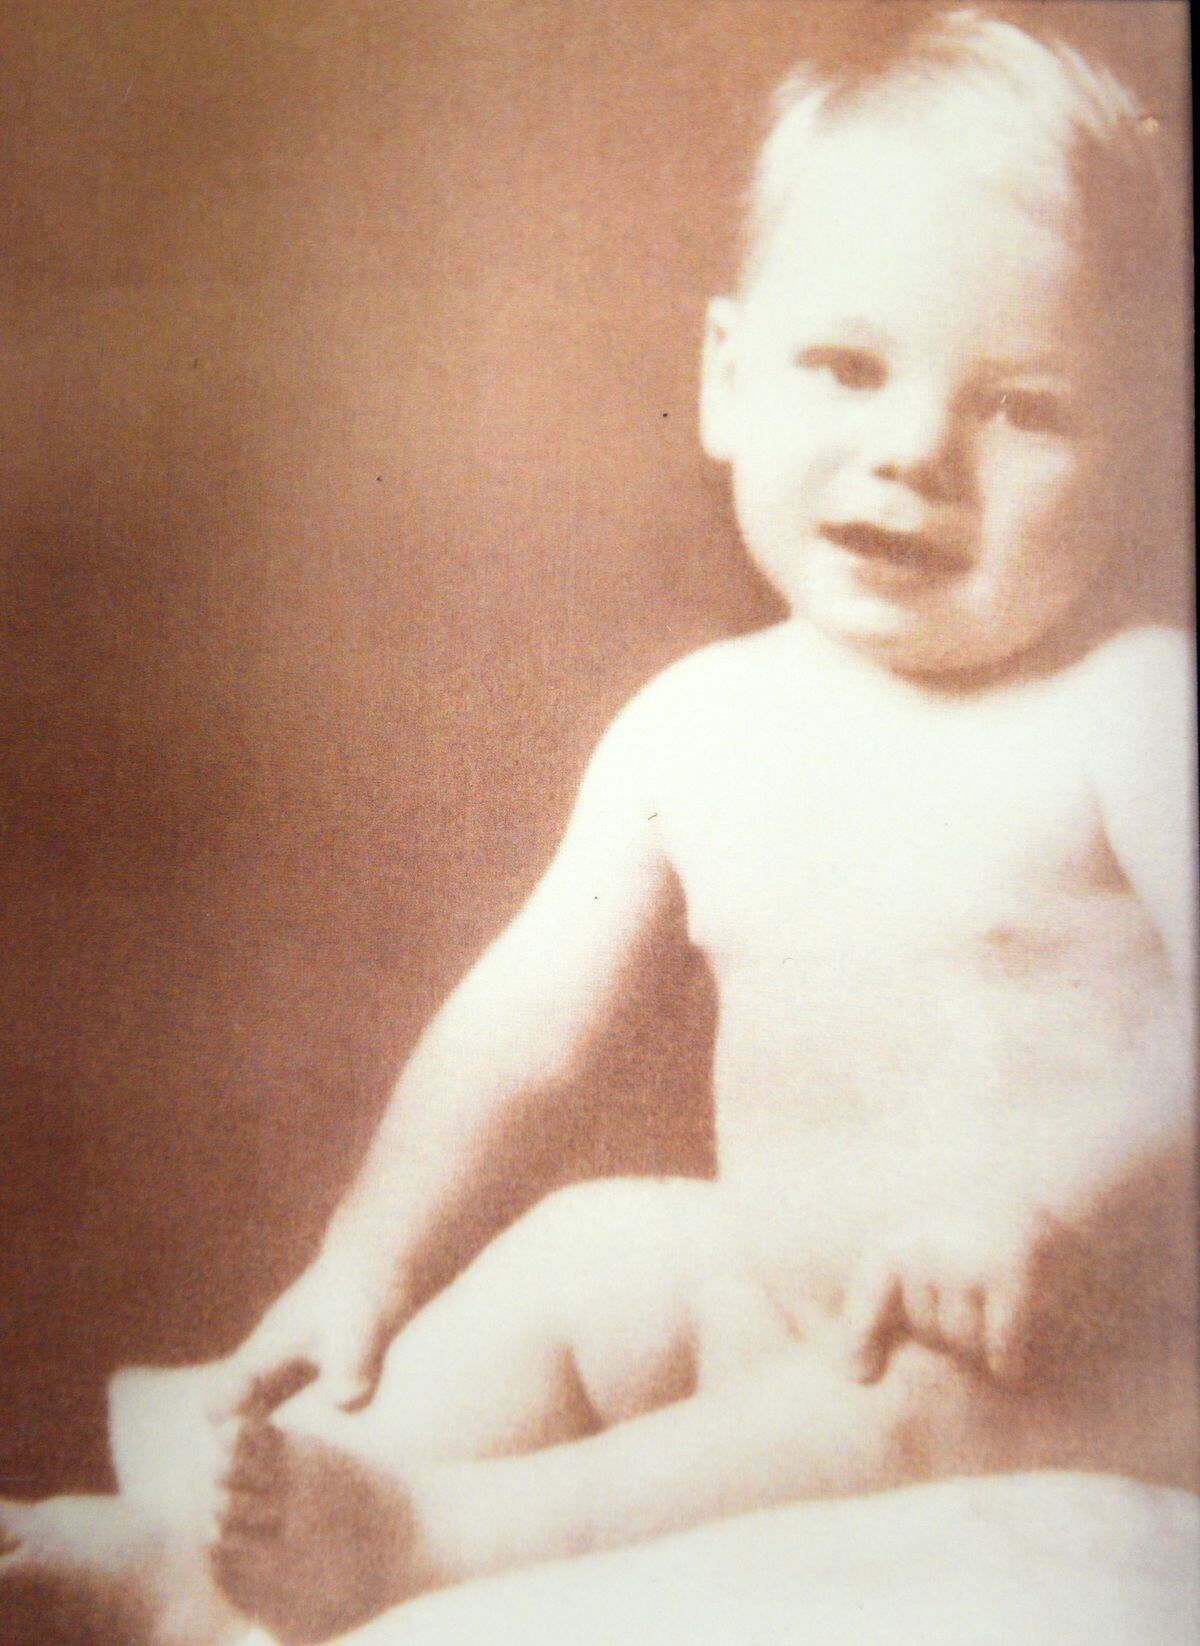 Duncan as a baby